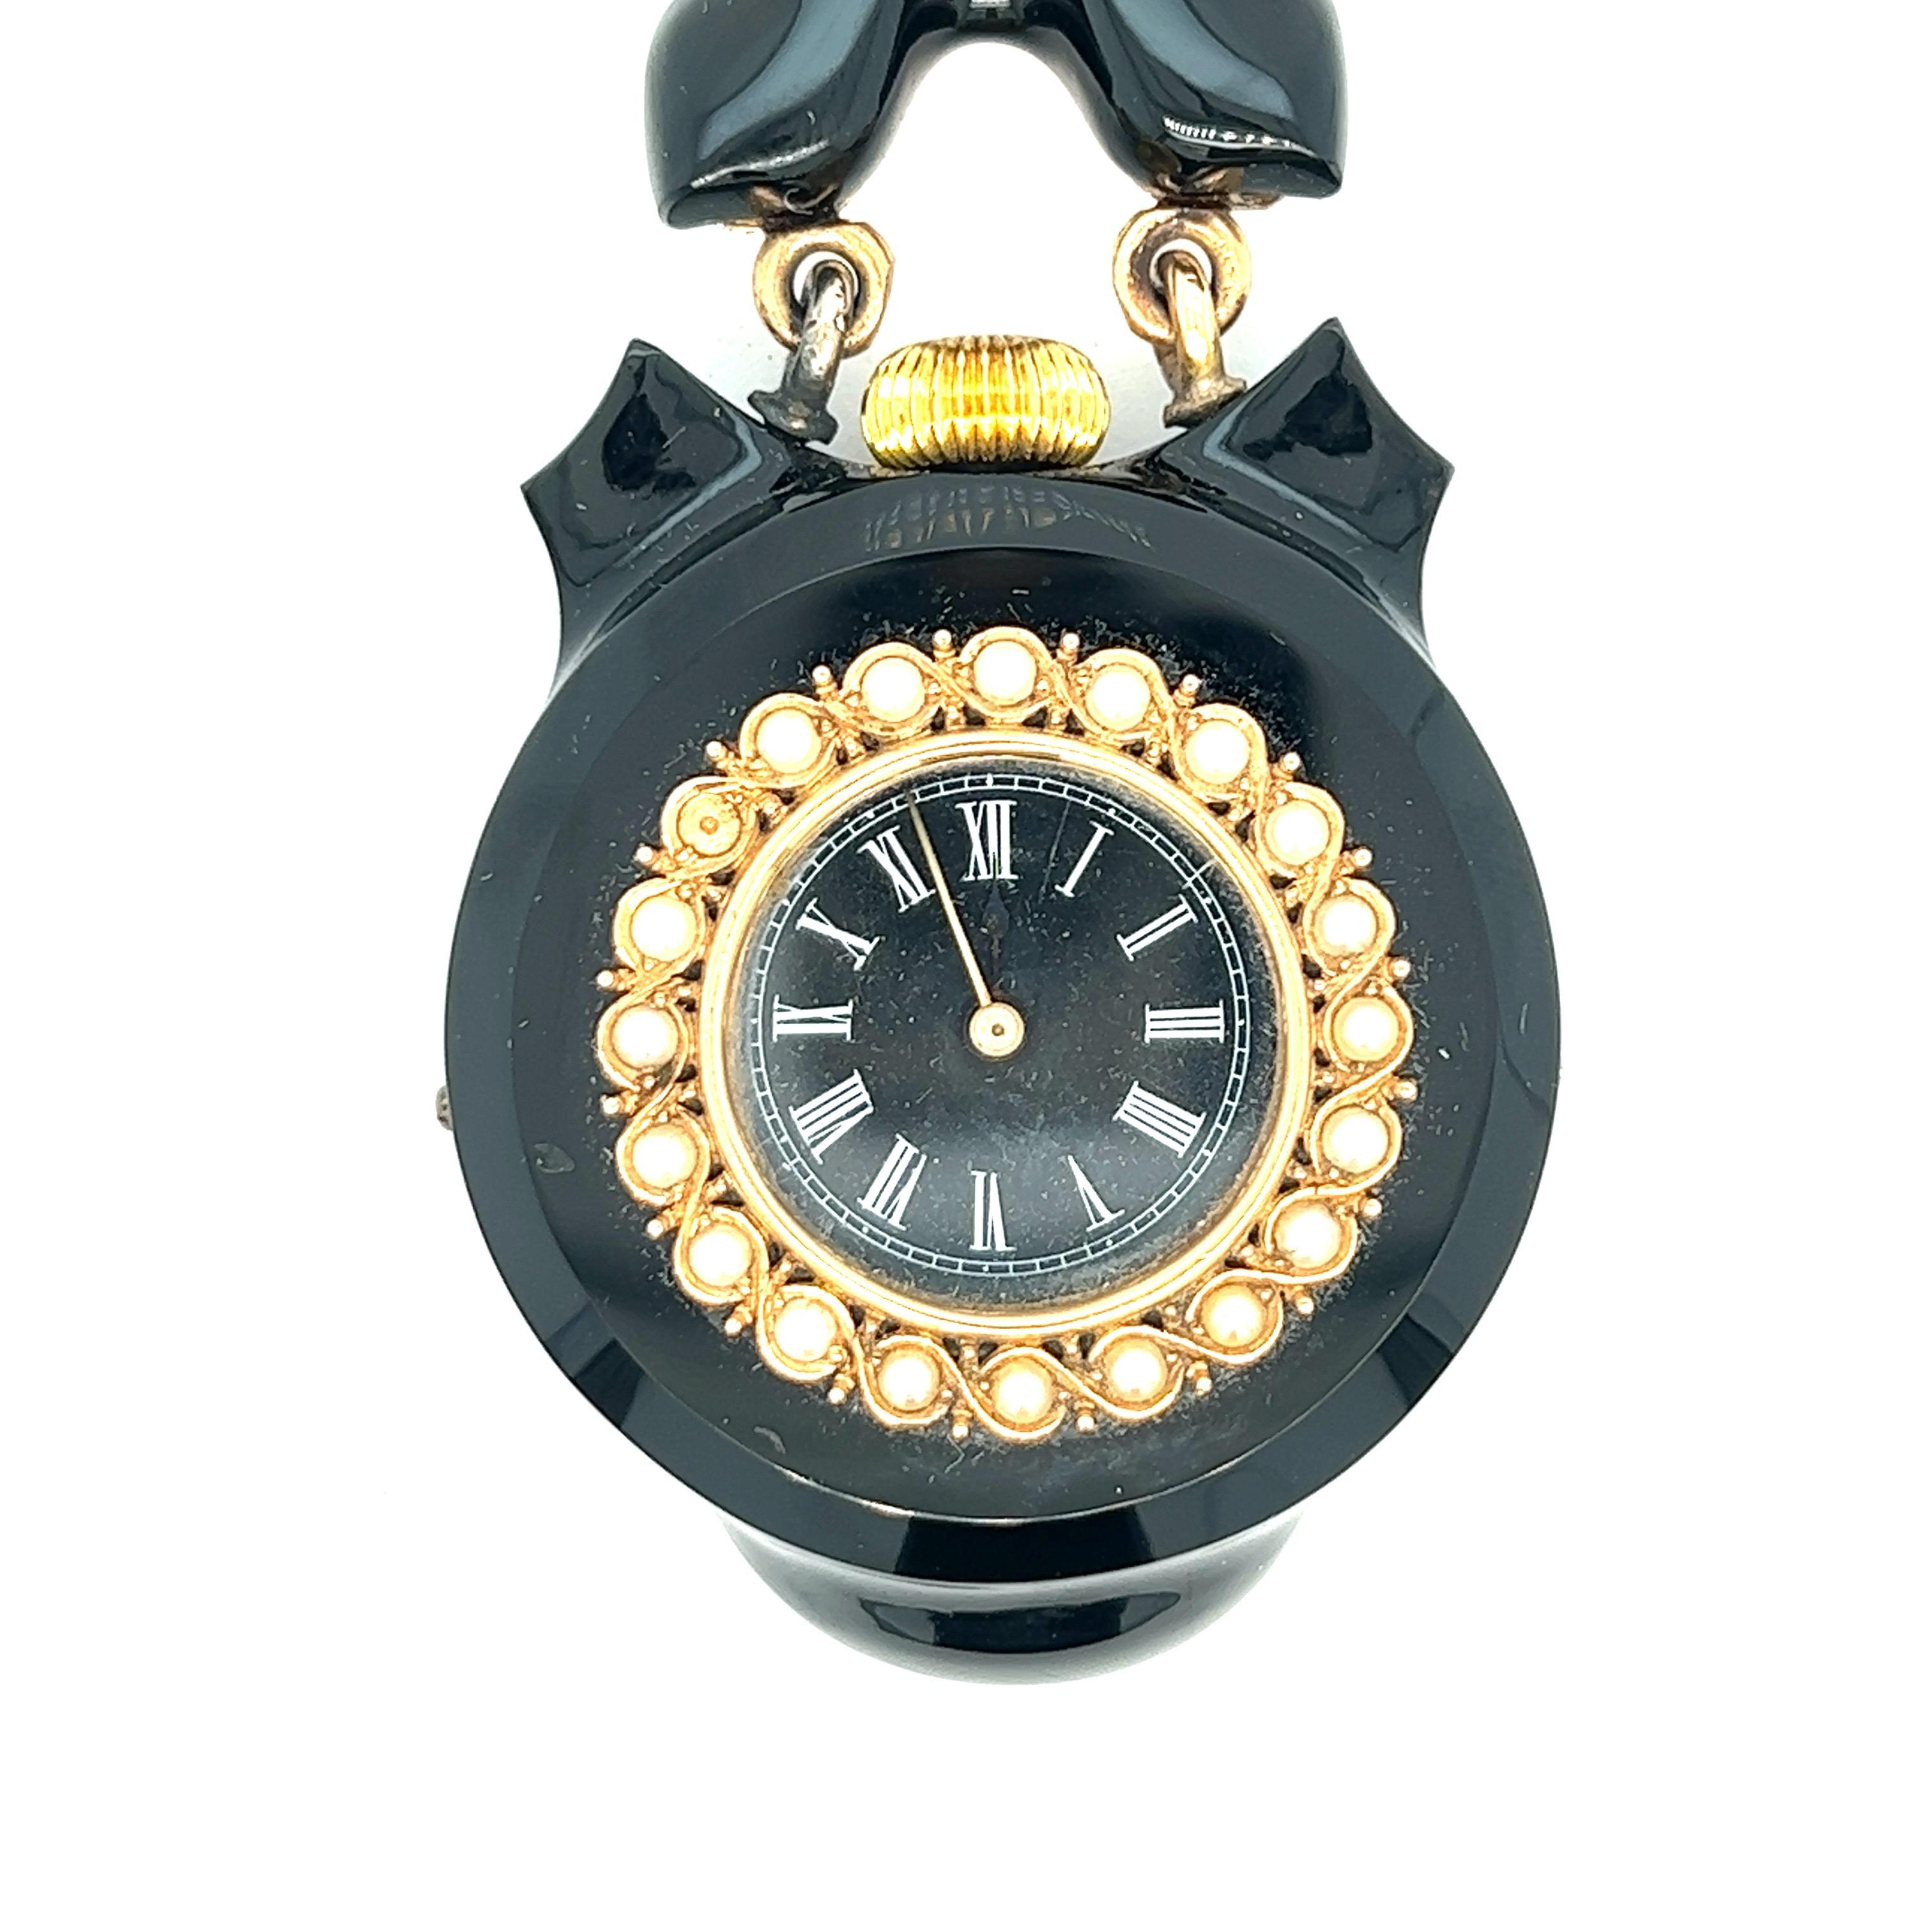 Uncut Black Onyx with Pearls Lapel Mourning Watch For Sale